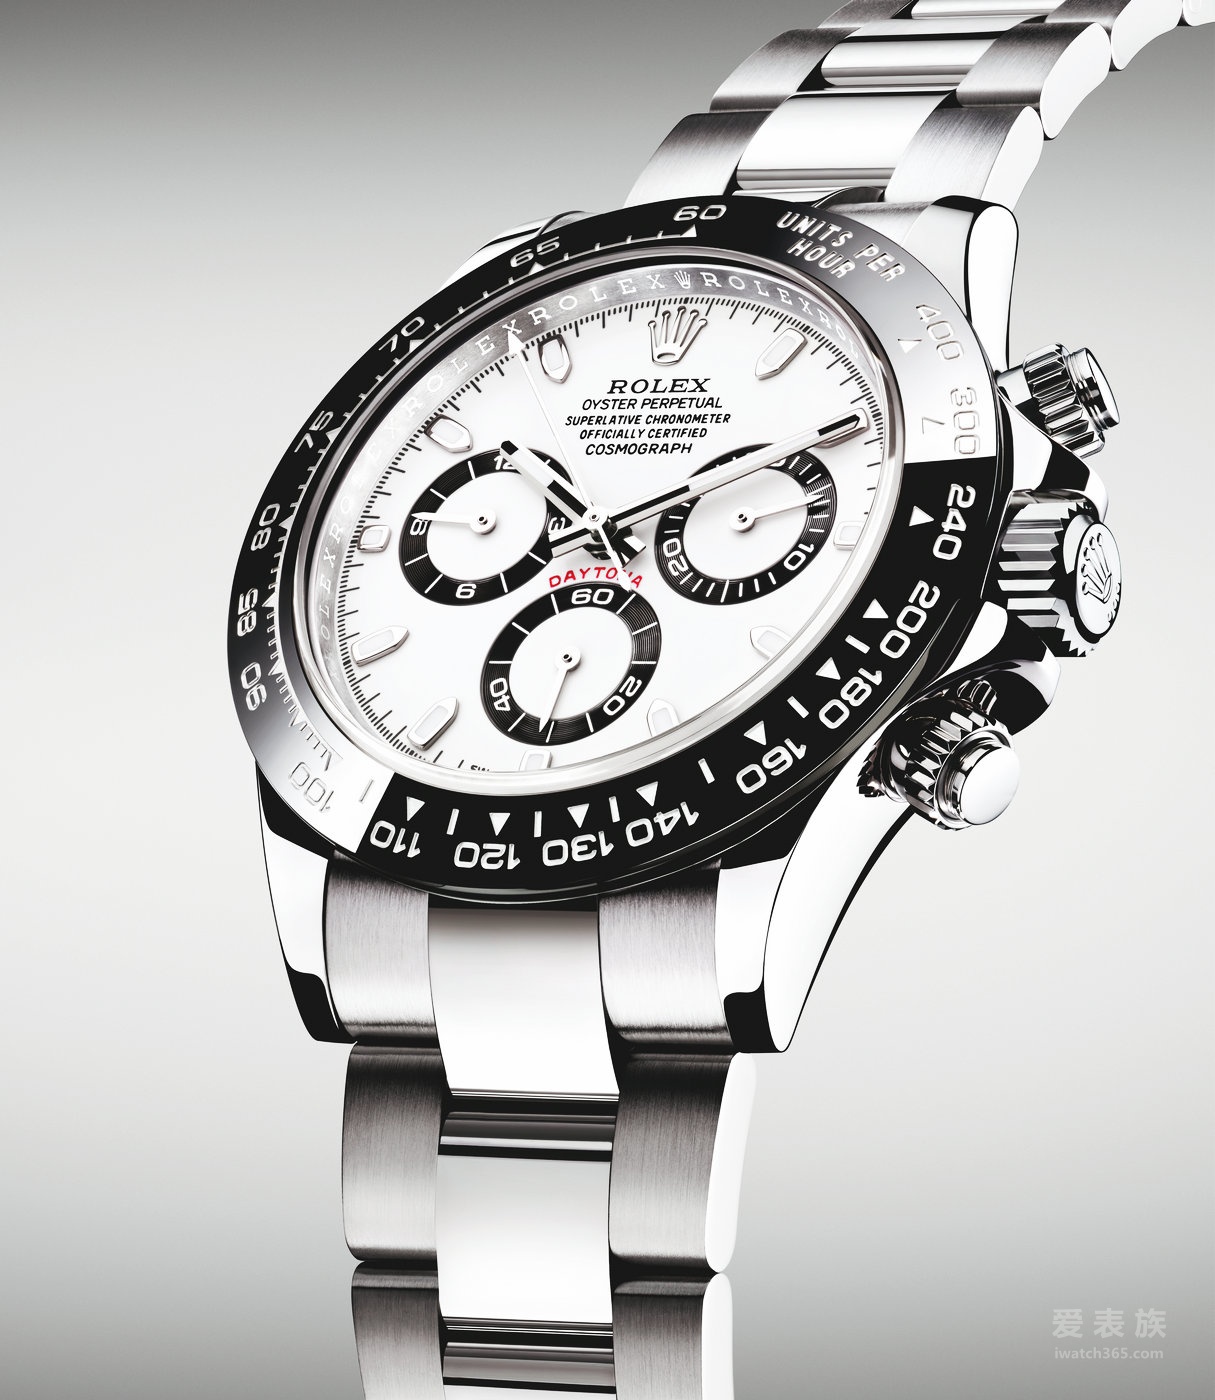 Rolex Oyster Perpetual Cosmograph Di Tong take birth rate chronograph